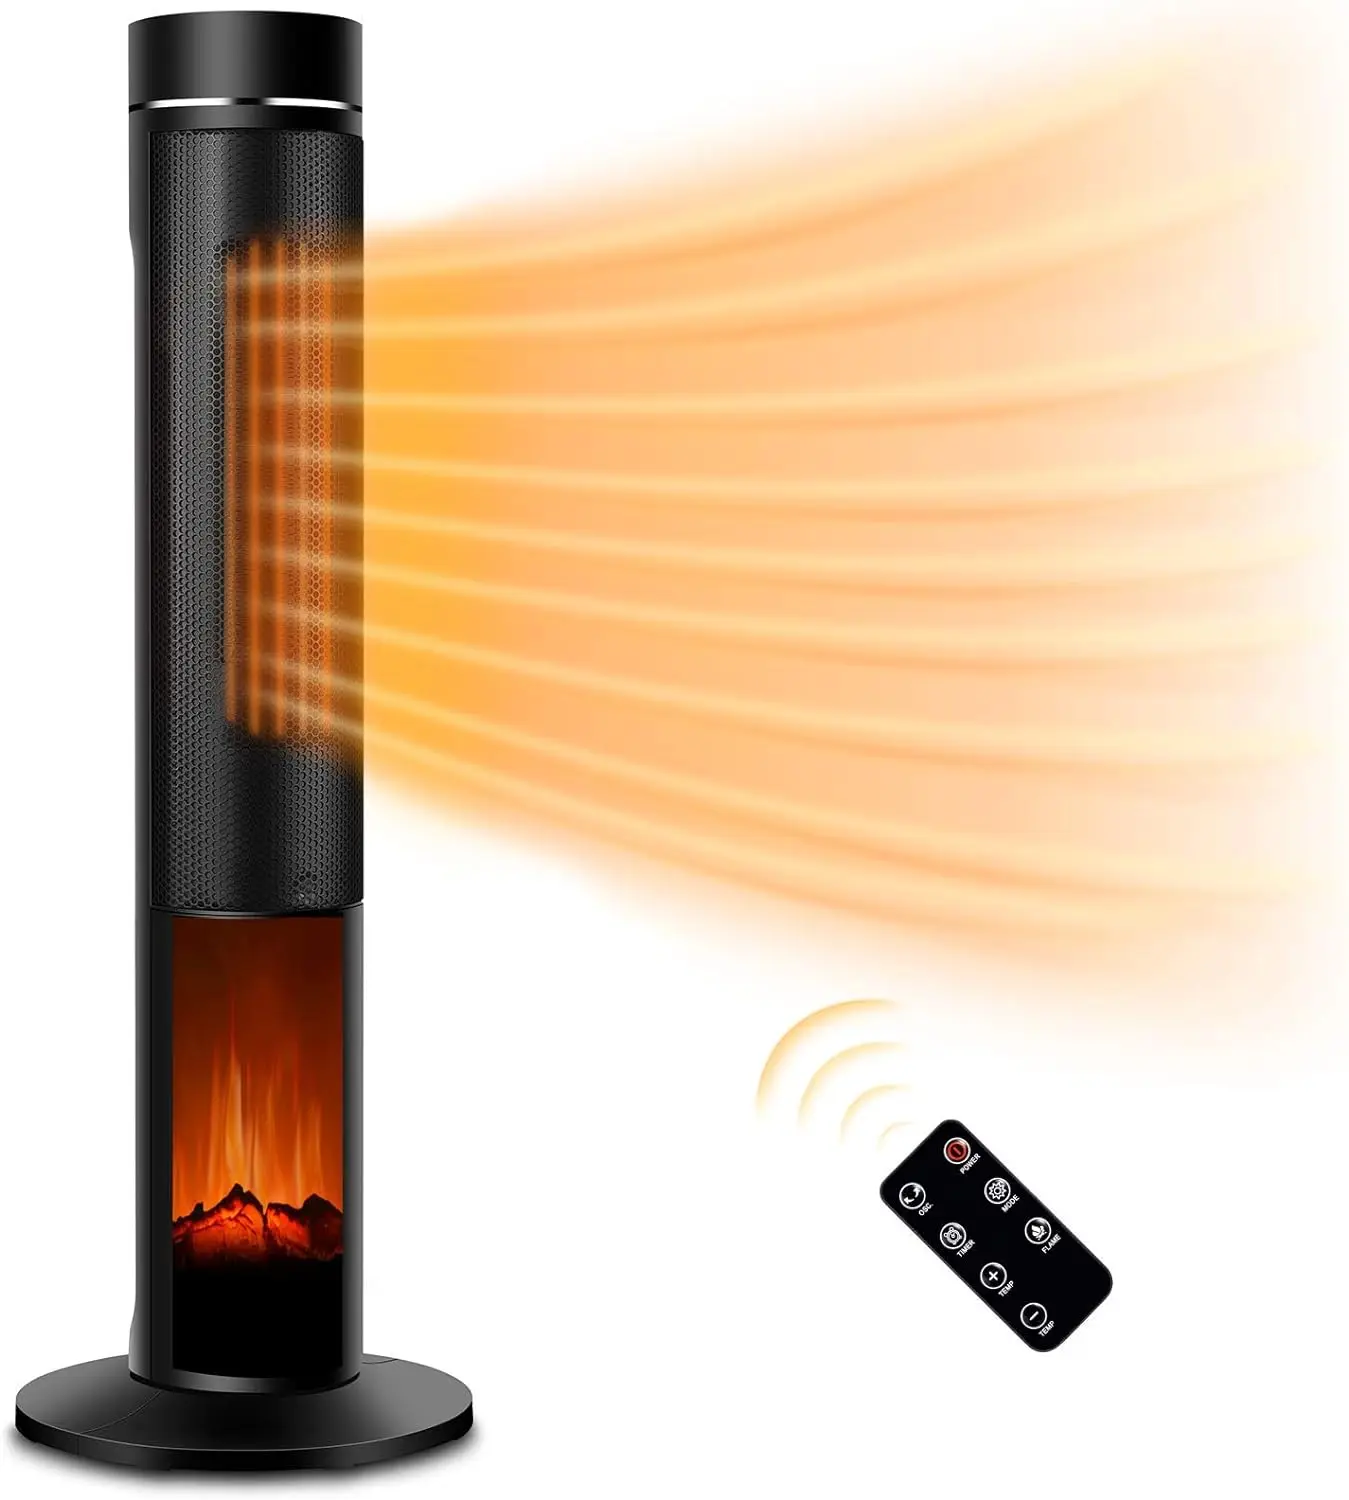 

Heater for Large Room - 36" Ceramic Space Heater for Room Heating w/Thermostat, Fast Heating, 3D Realistic Flame, Oscillati